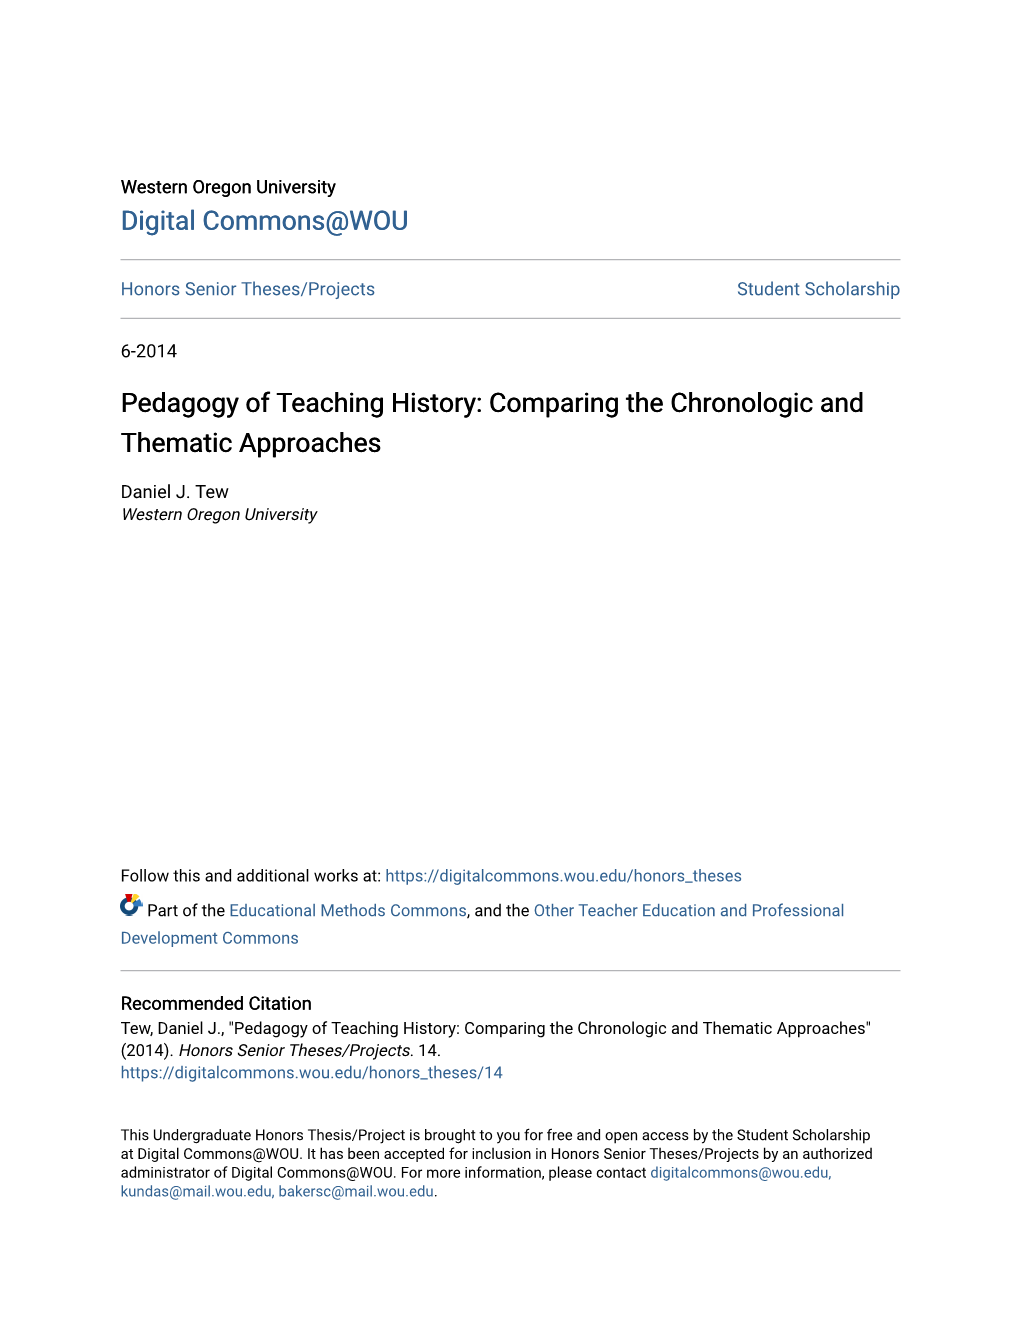 Comparing the Chronologic and Thematic Approaches